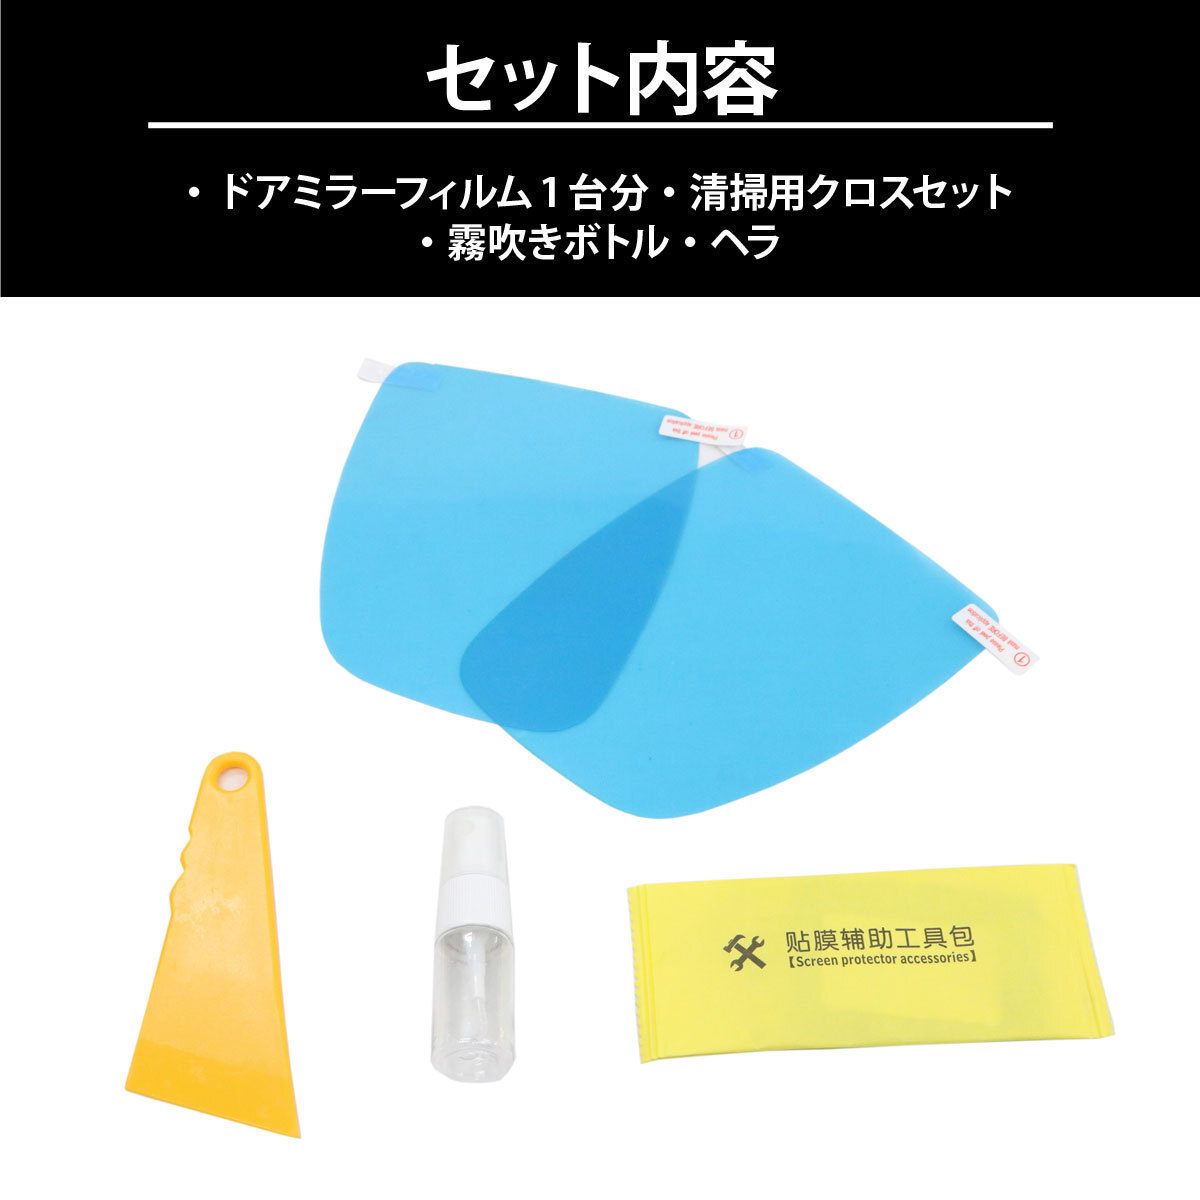  postage 185 jpy car make exclusive use Benz R230( previous term ) exclusive use water-repellent door mirror film left right set water-repellent effect 6 months shipping deadline 18 hour 